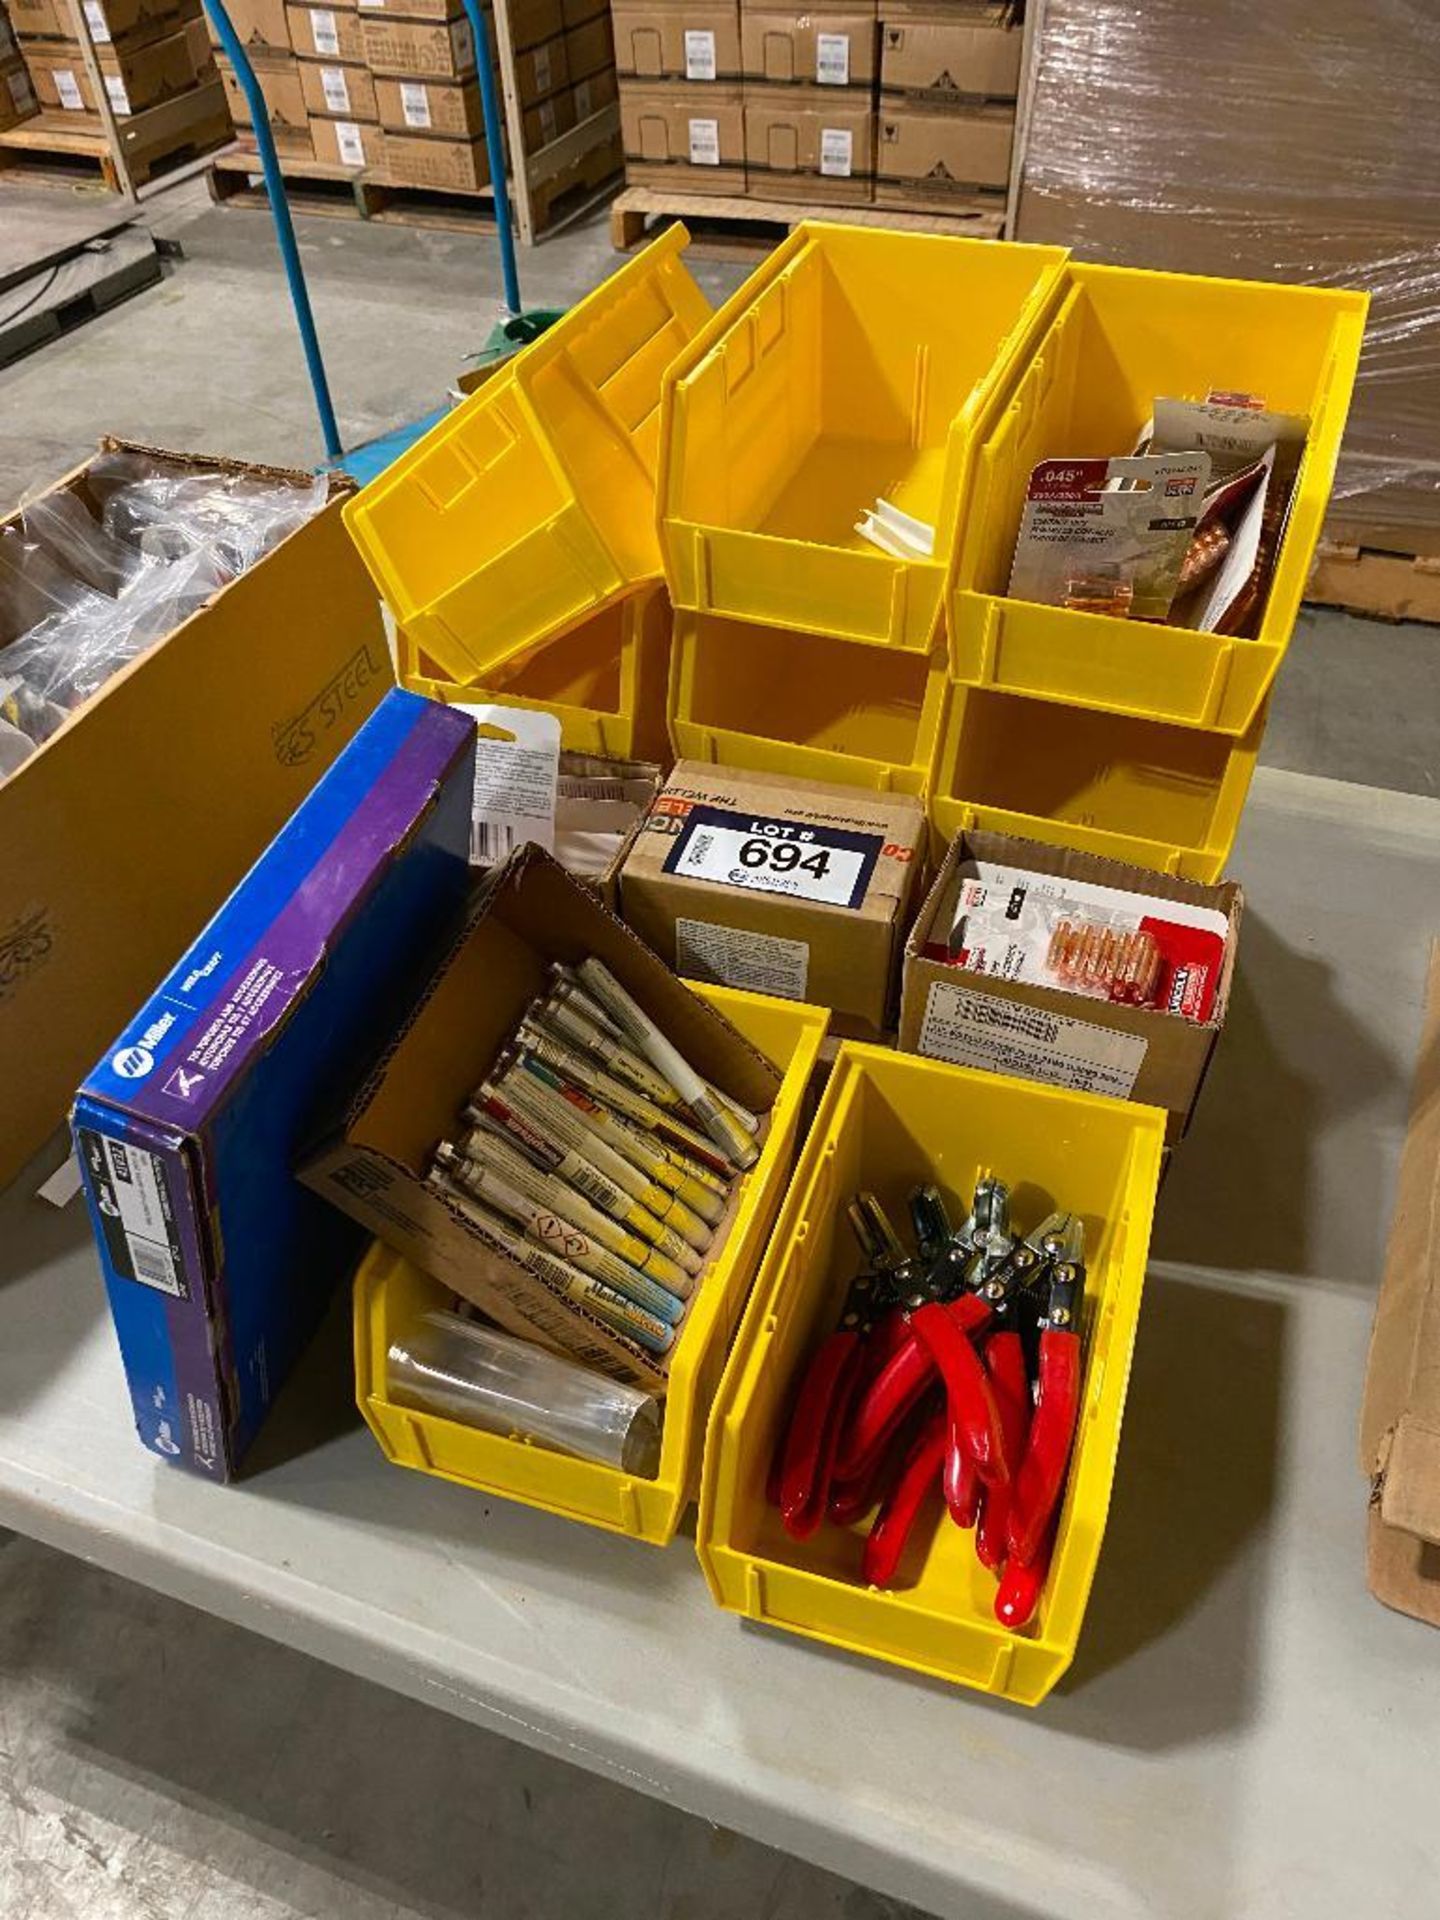 Lot of Asst. Parts Bins, Cutting Tips, Markers, etc. - Image 2 of 3